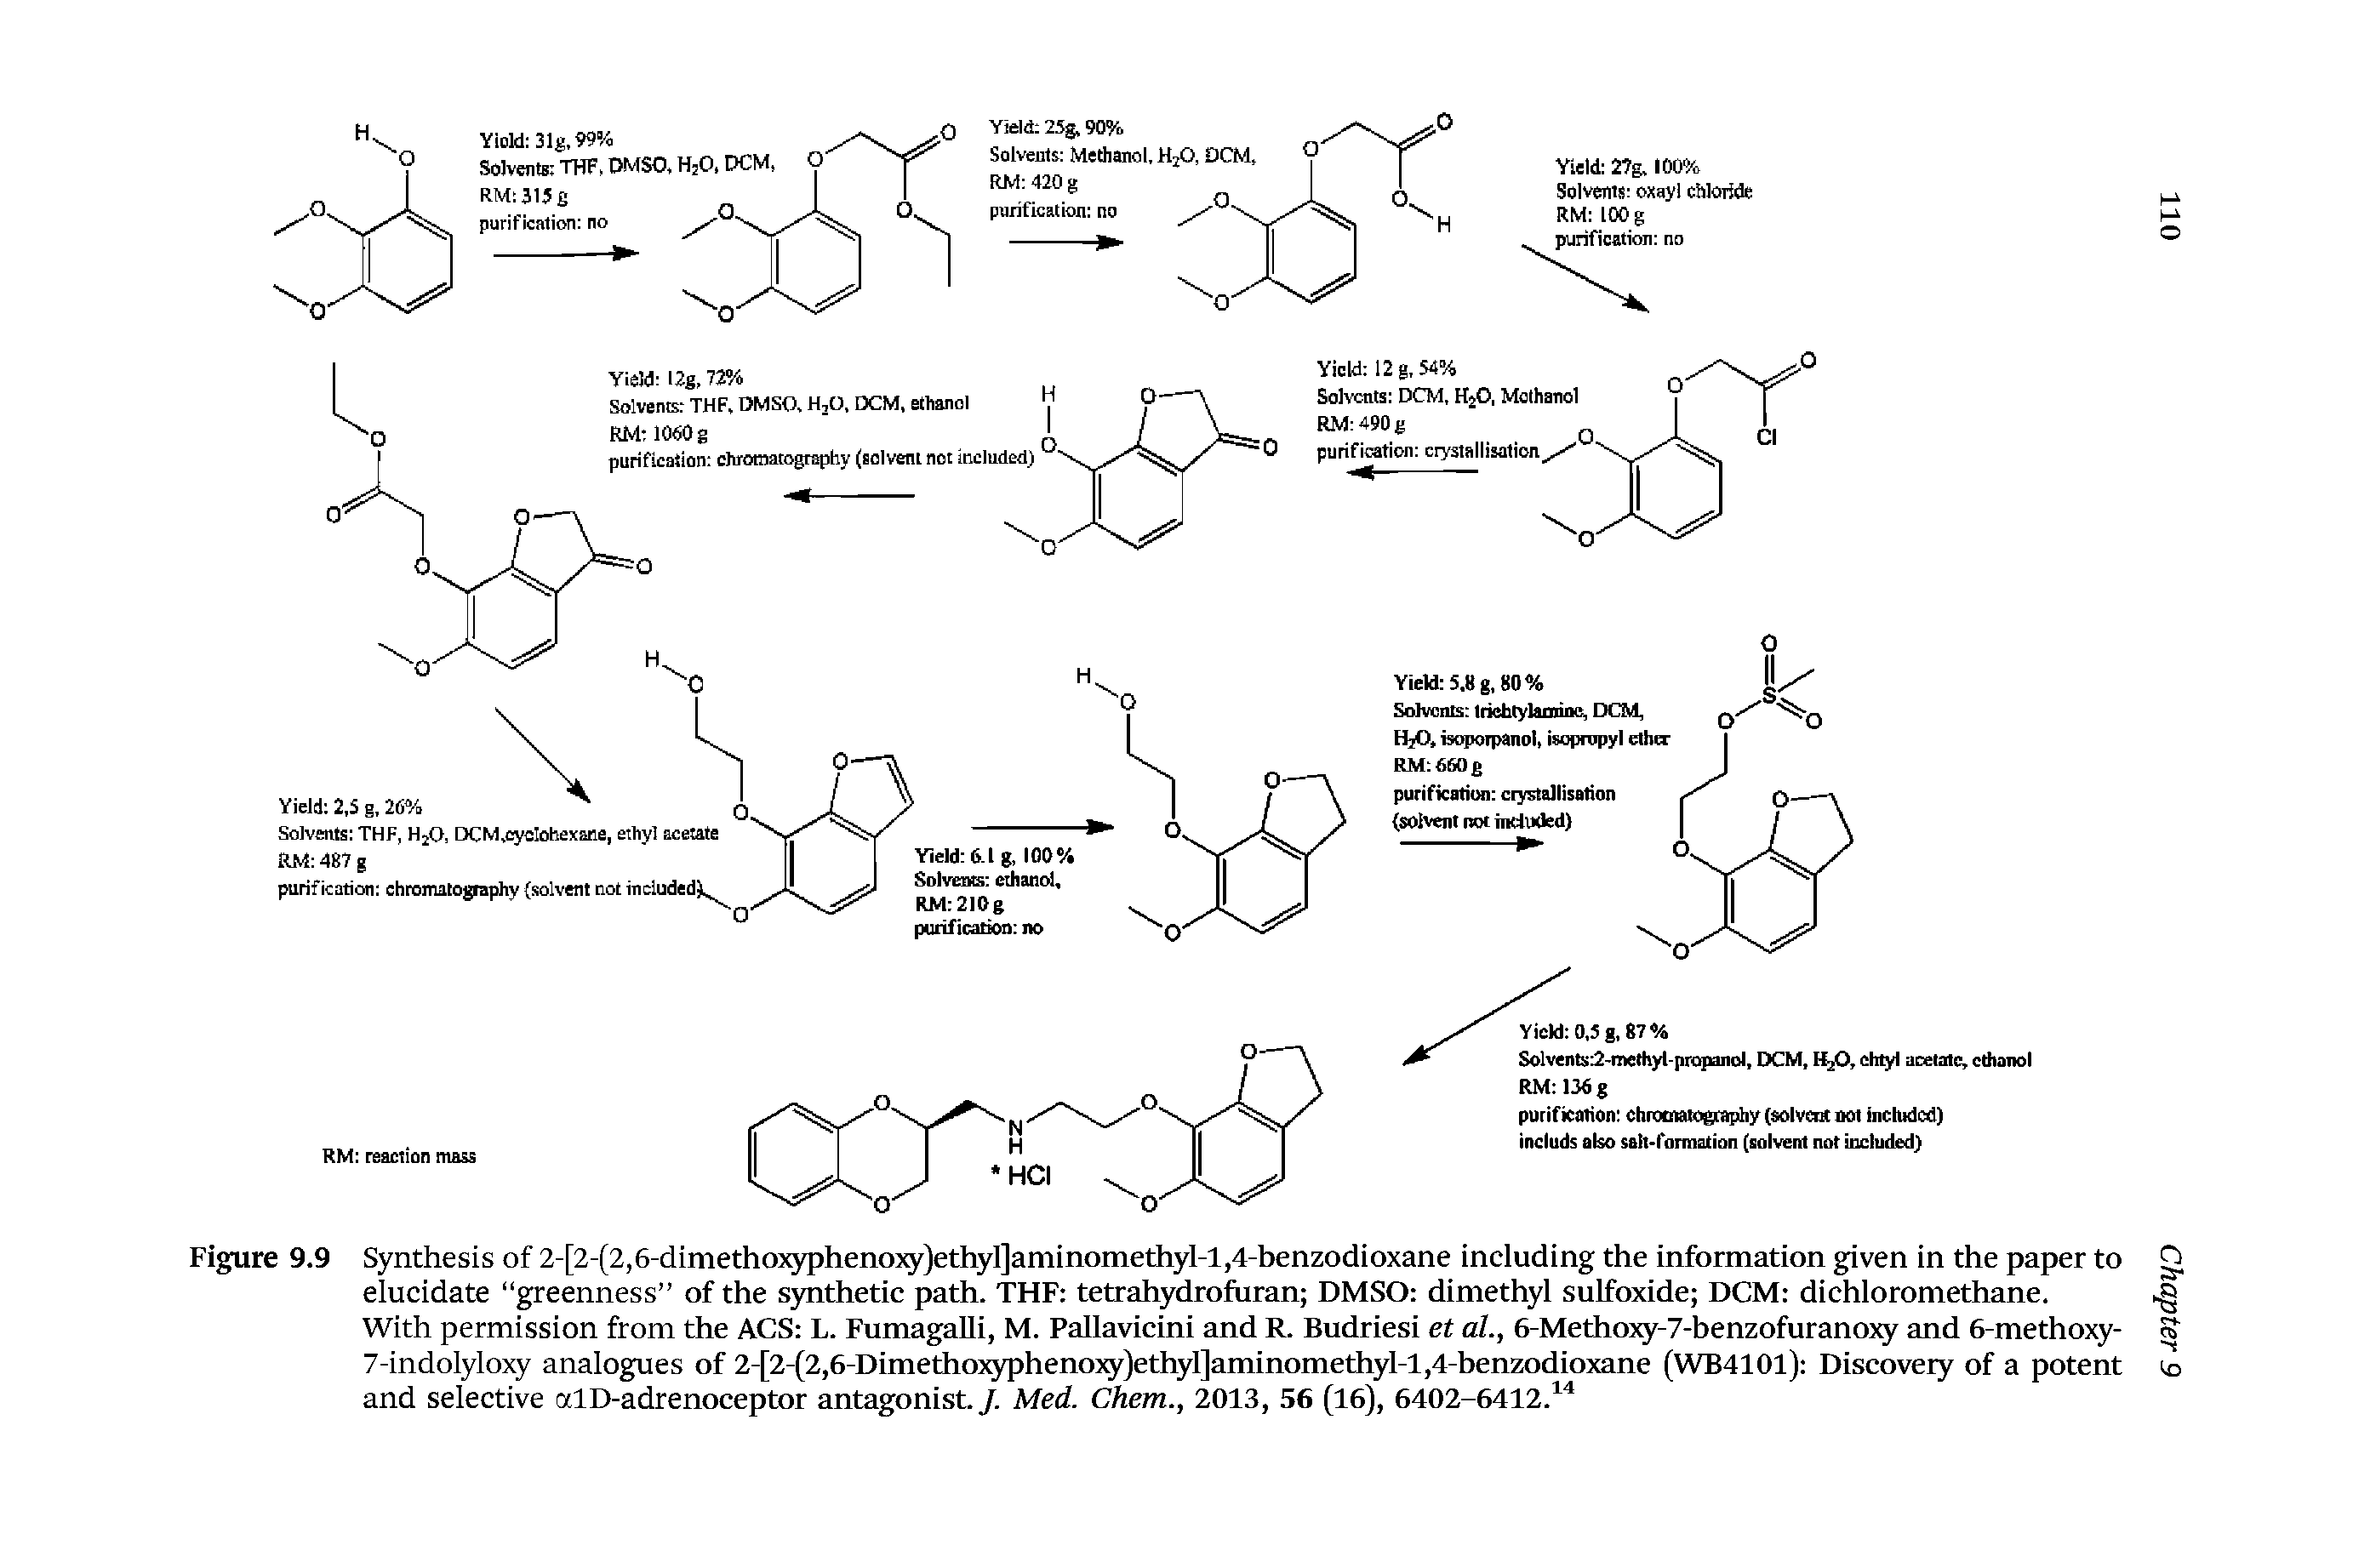 Figure 9.9 Synthesis of 2-[2-(2,6-dimetho3q heno3g )ethyI]aminomethyl-l,4-benzodioxane including the information given in the paper to elucidate greenness of the s)mthetie path. THF tetrahydrofuran DMSO dimethyl sulfoxide DCM dichloromethane.